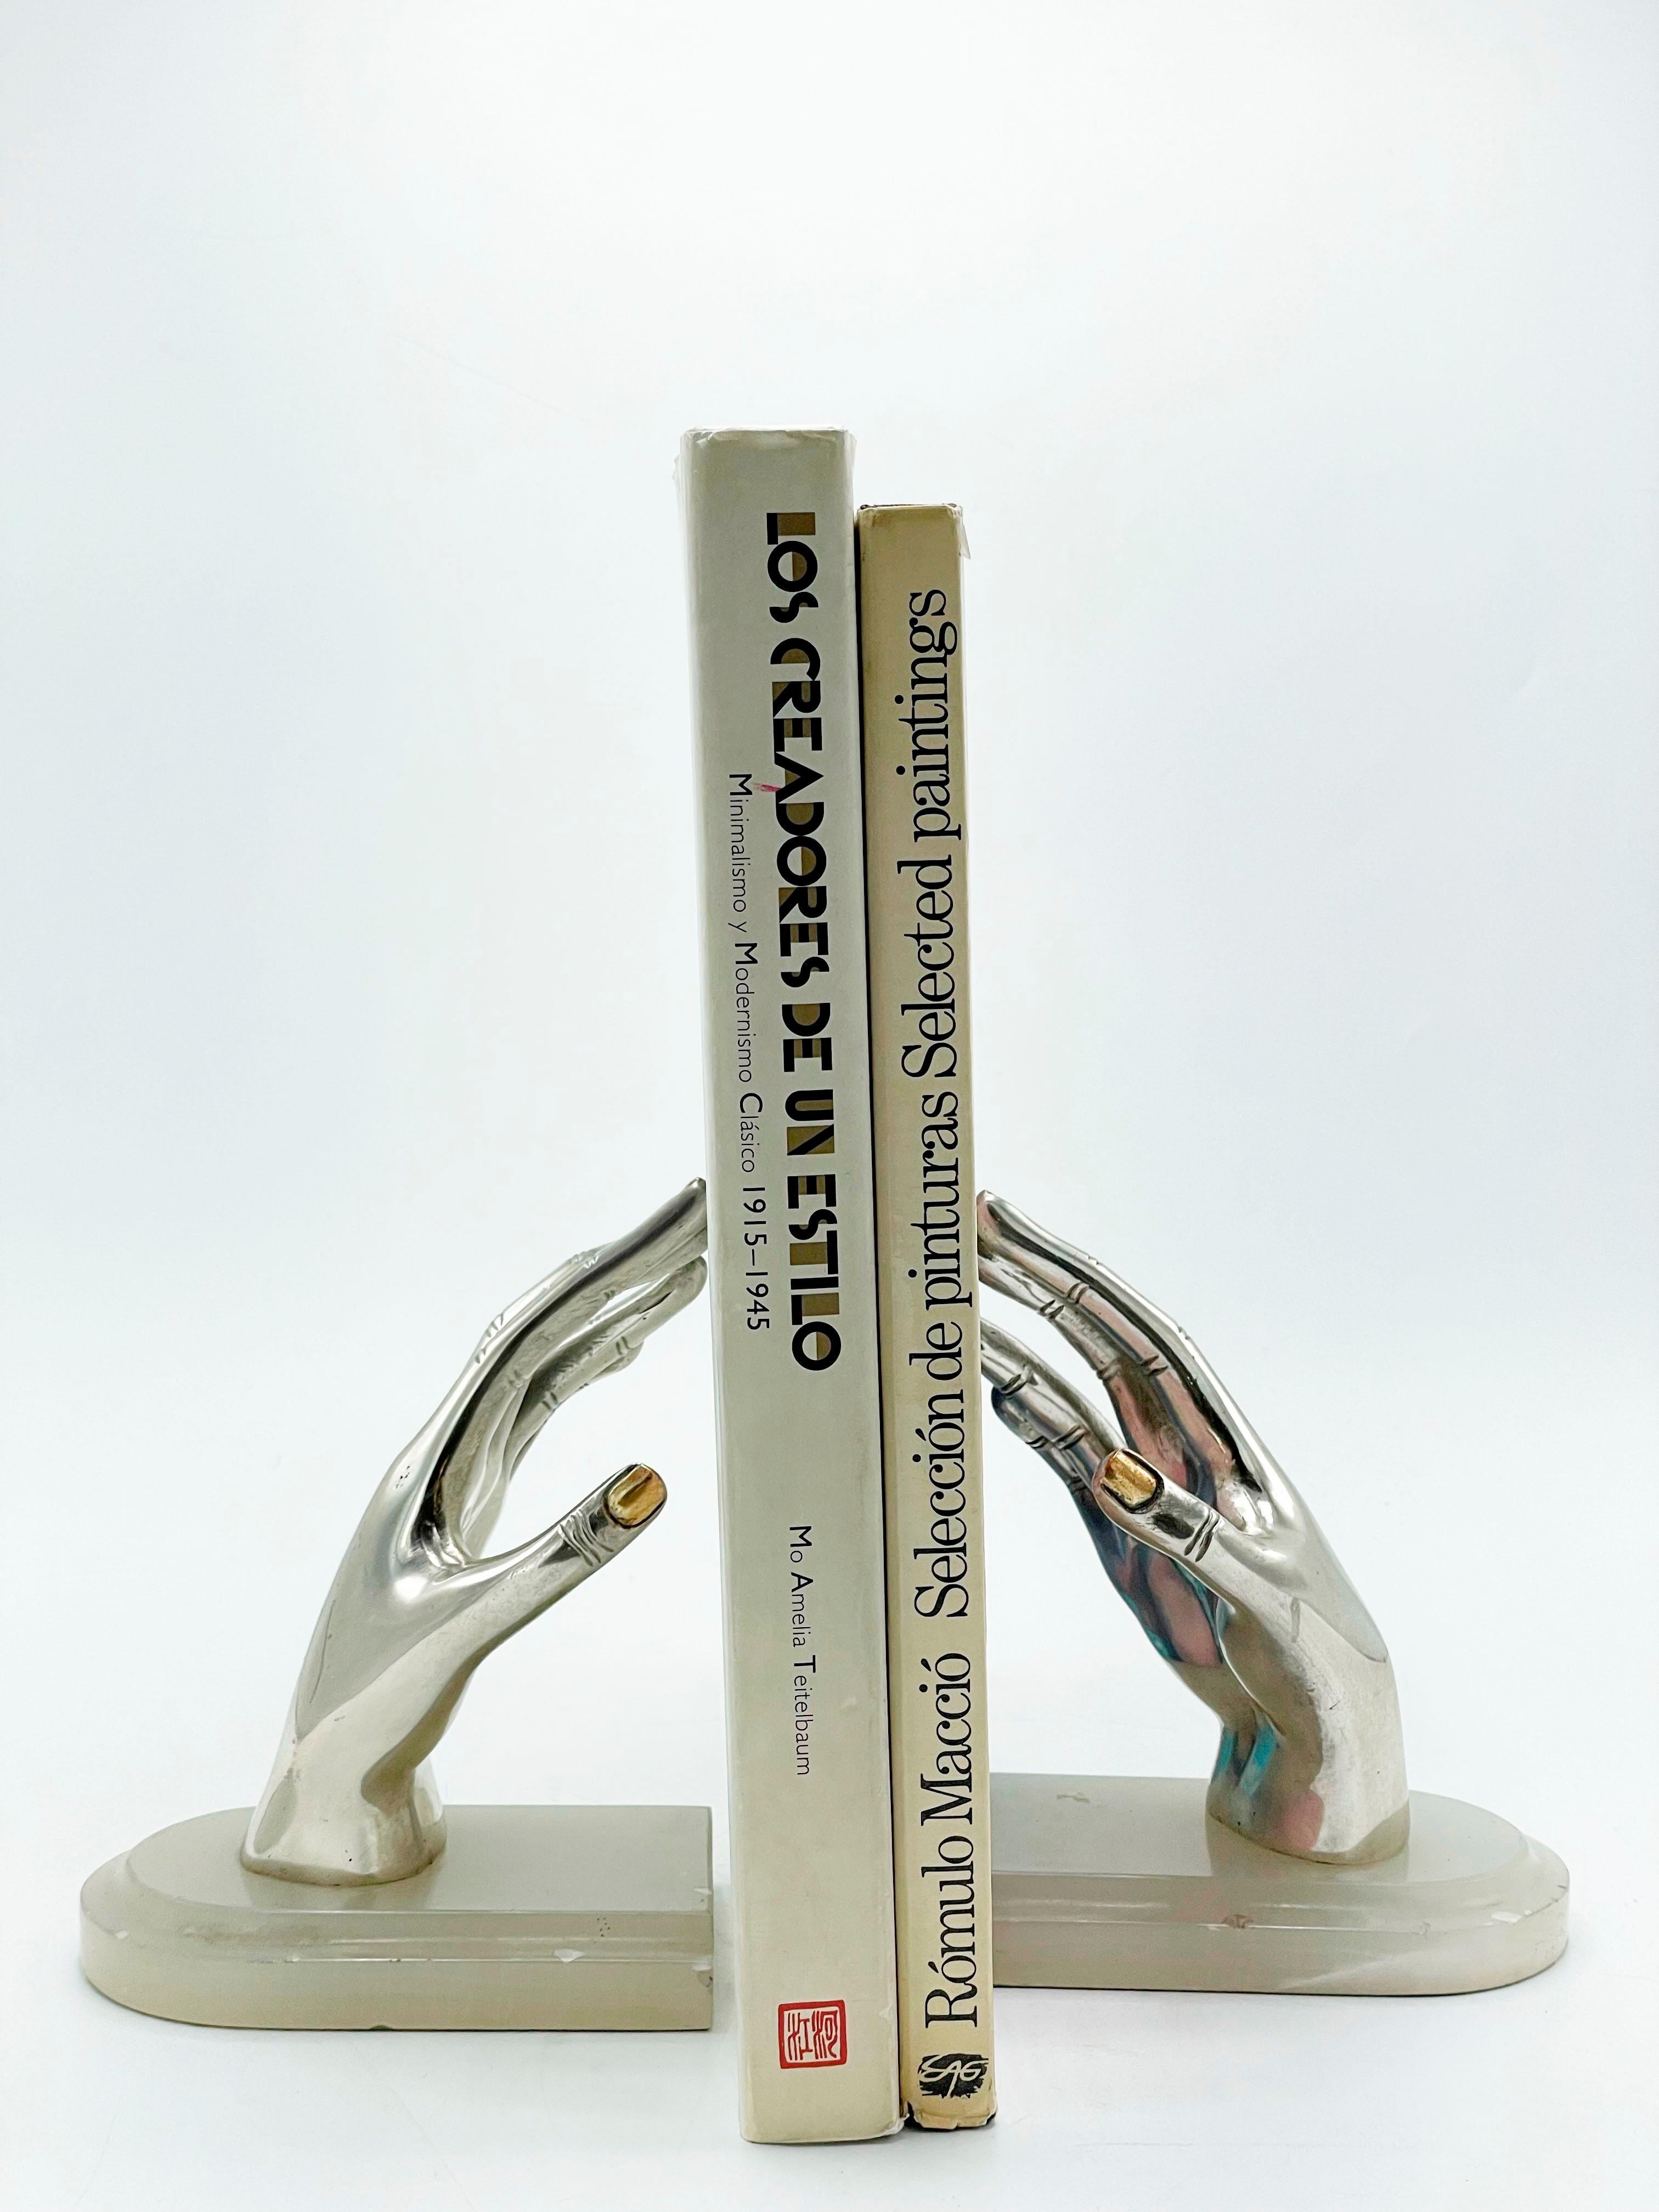 Hand Book Squeeze in two colors with marble base 20th Century
Beautiful Art Deco book press, made of silver metal and gold metal on the nails giving that decorative touch, on a transparent marble base.
Measures:
Height: 15 centimeters
Diameter: 13